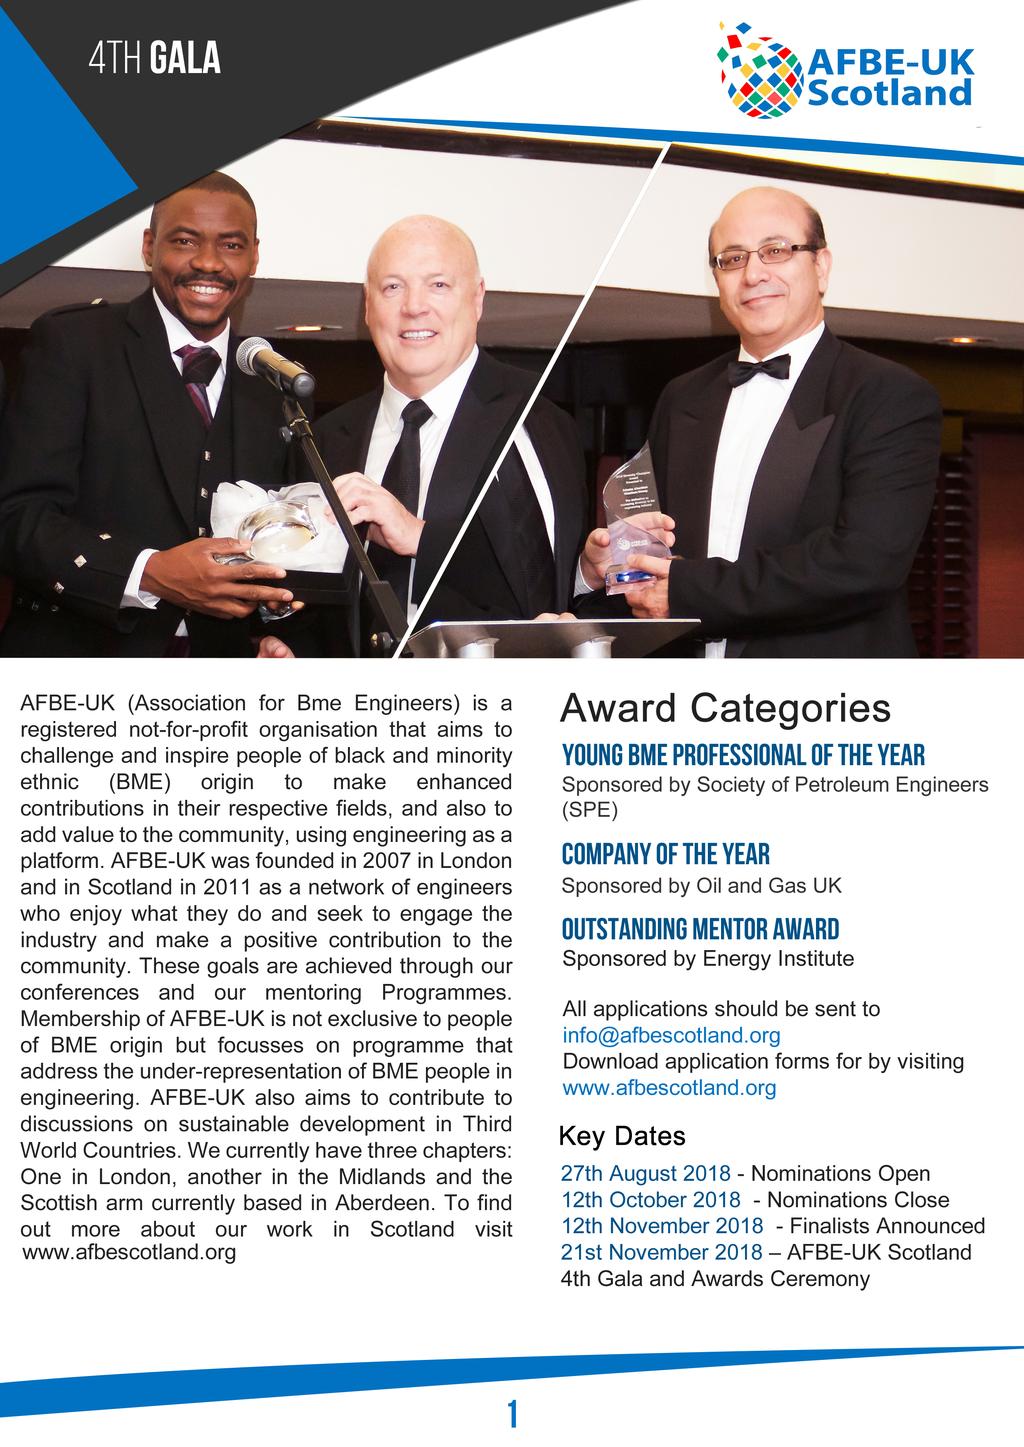 4th gala AFBE-UK (Association for Bme Engineers) is a registered not-for-profit organisation that aims to challenge and inspire people of black and minority ethnic (BME) origin to make enhanced